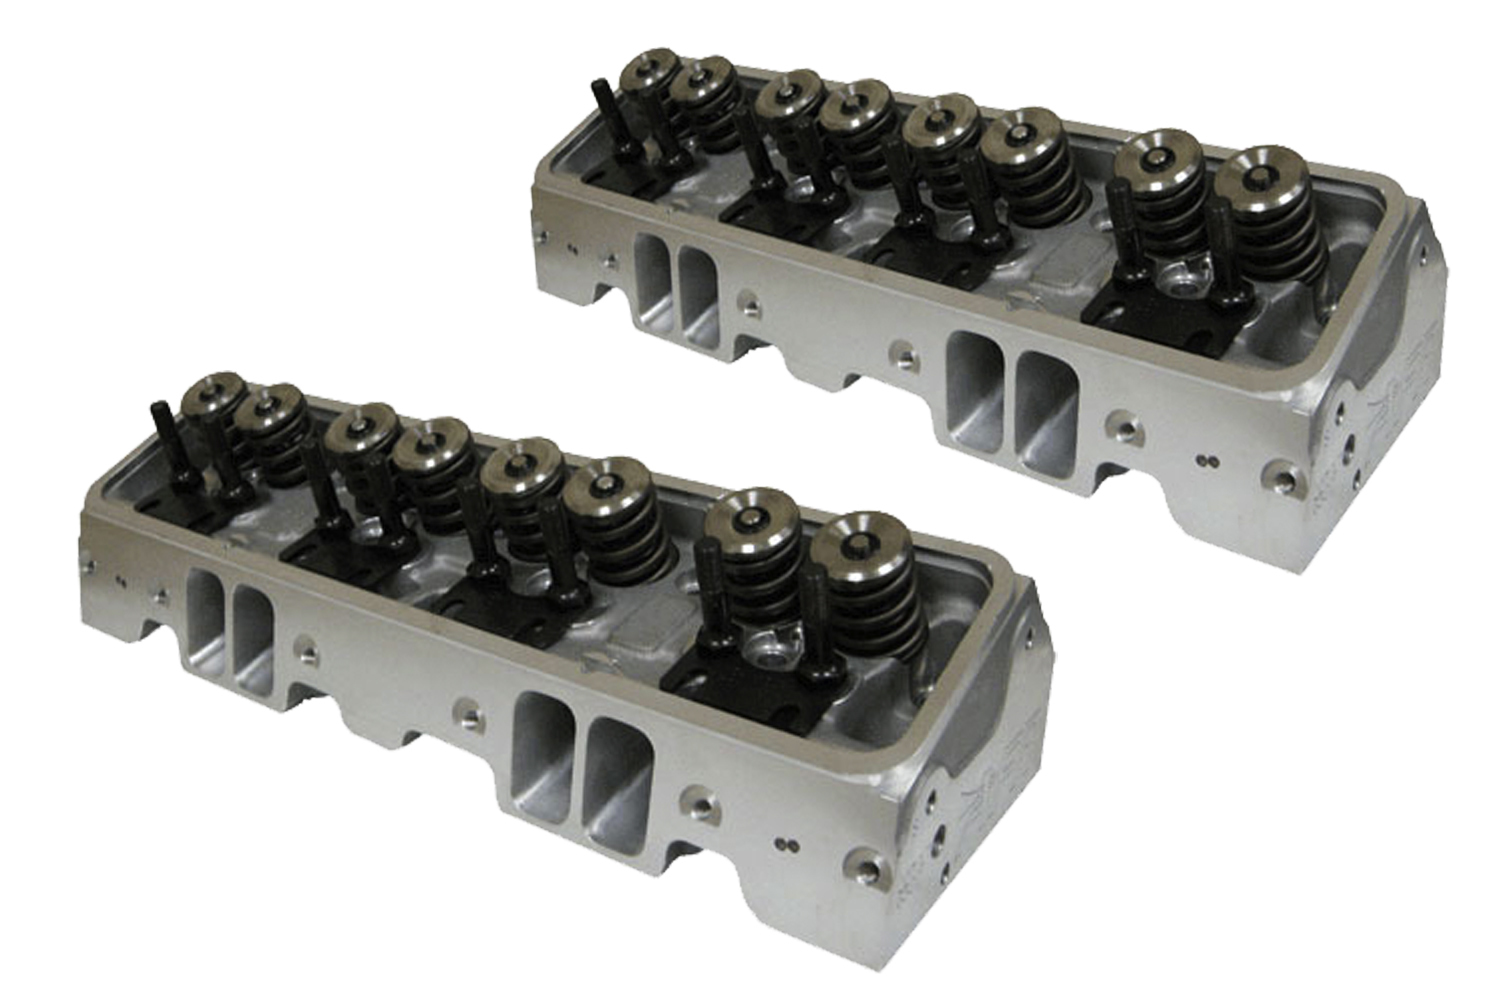 Air Flow Research 1031 Cylinder Head, Eliminator Street, Assembled, 2.050 / 1.600 in Valves, 195 cc Intake, 65 cc Chamber, 1.290 in Springs, Angle Plug, Aluminum, GM LT-Series 1992-97, Pair